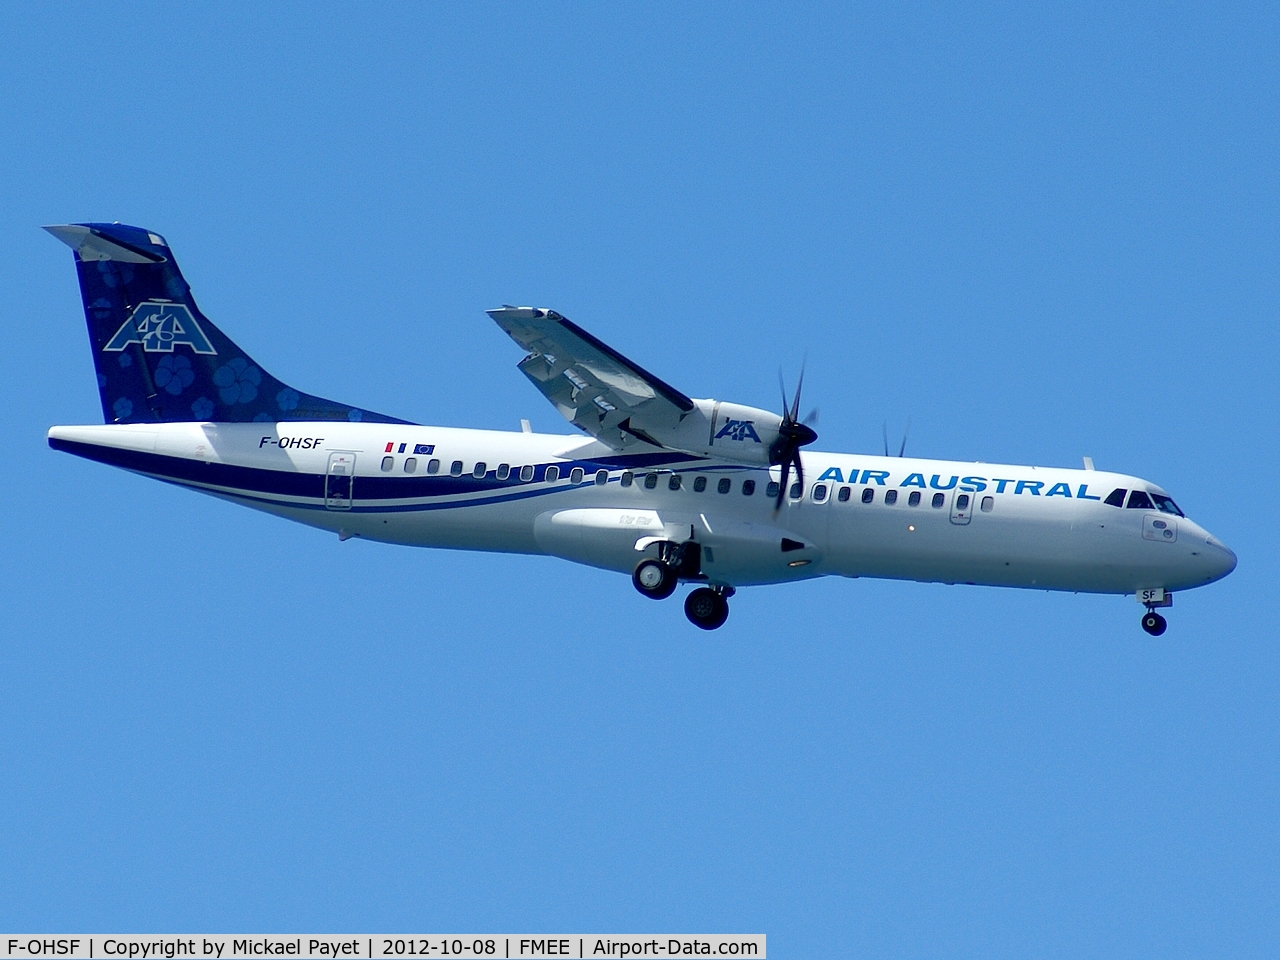 F-OHSF, 2000 ATR 72-212A C/N 650, Wearing new colors